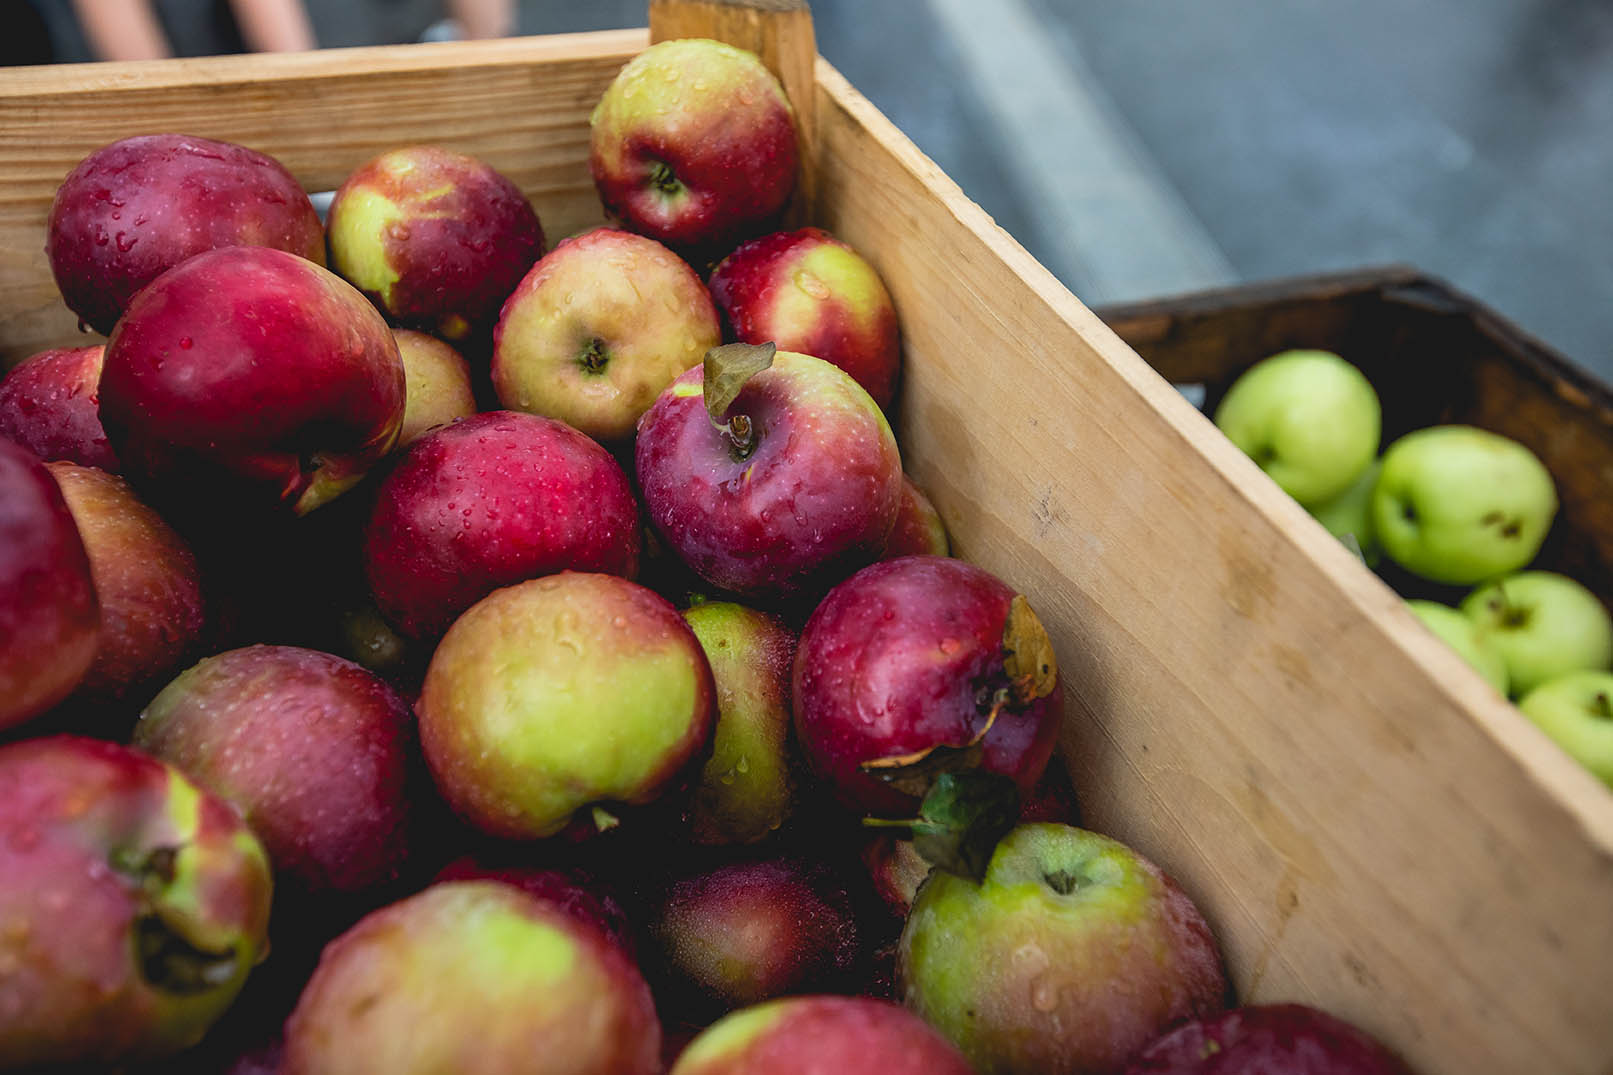 Local apples are available in crates at the Greenmarket at Oculus Plaza.